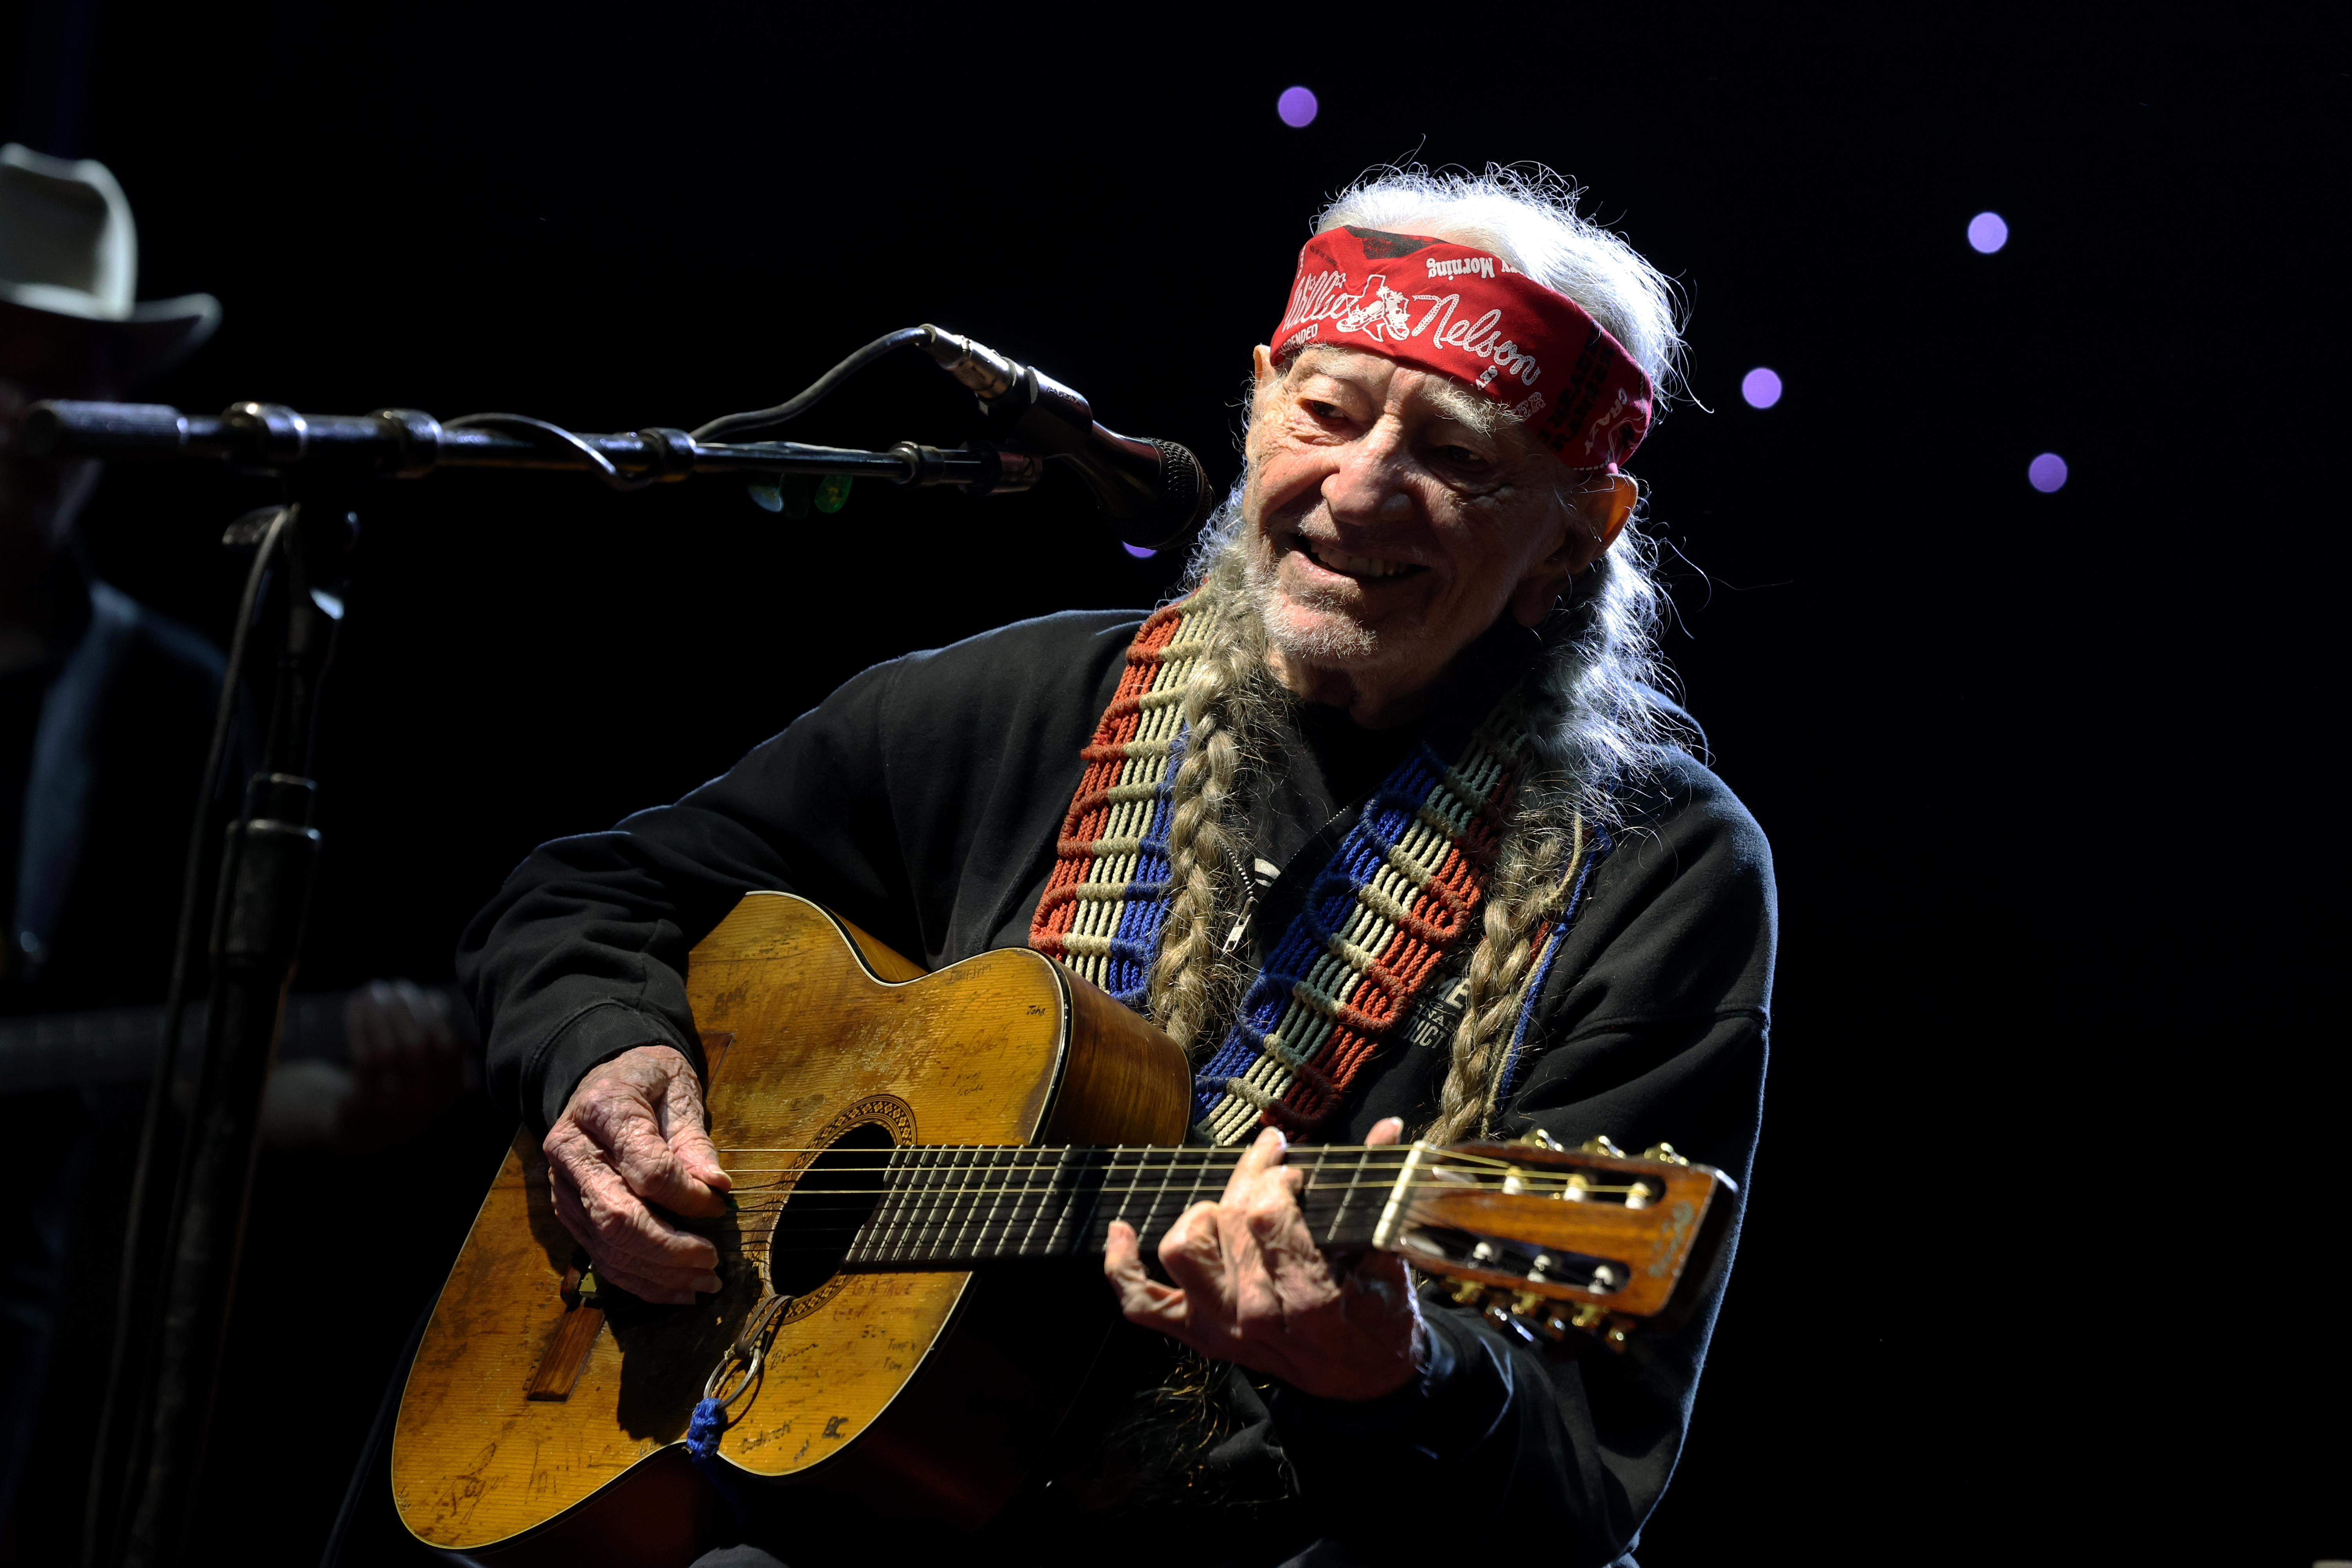 Willie's son, Lukas, will perform with The Family Band in his father's absence